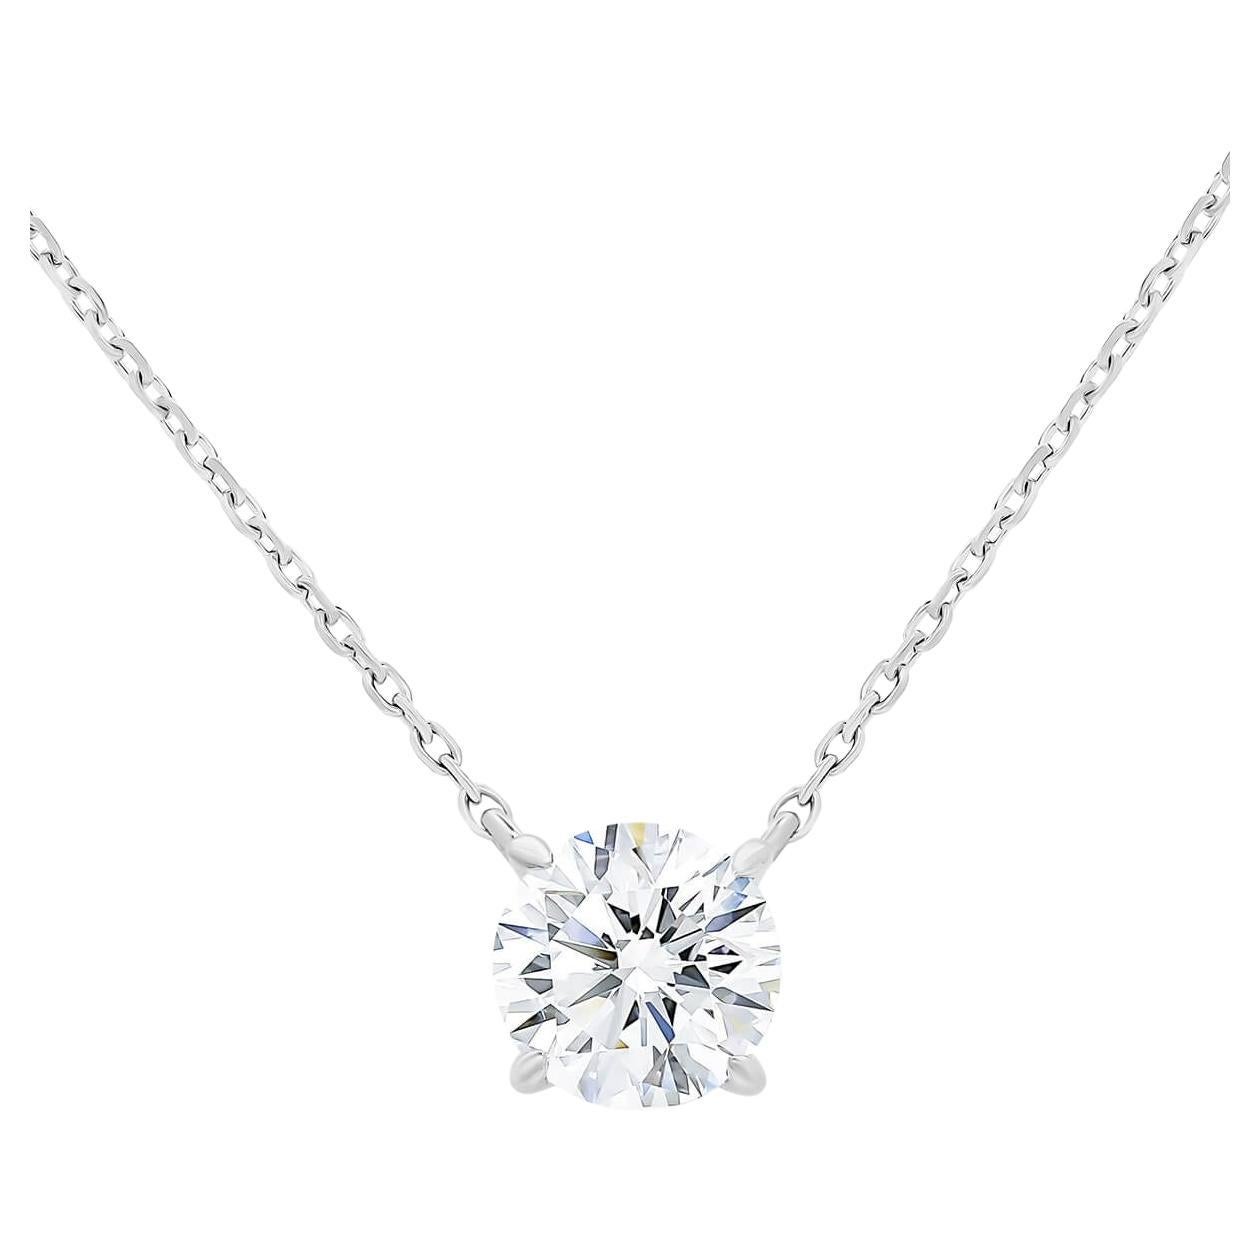 Beauvince GIA HVVS1 Certified 1.00 Ct Round Solitaire Diamond Pendant For Sale